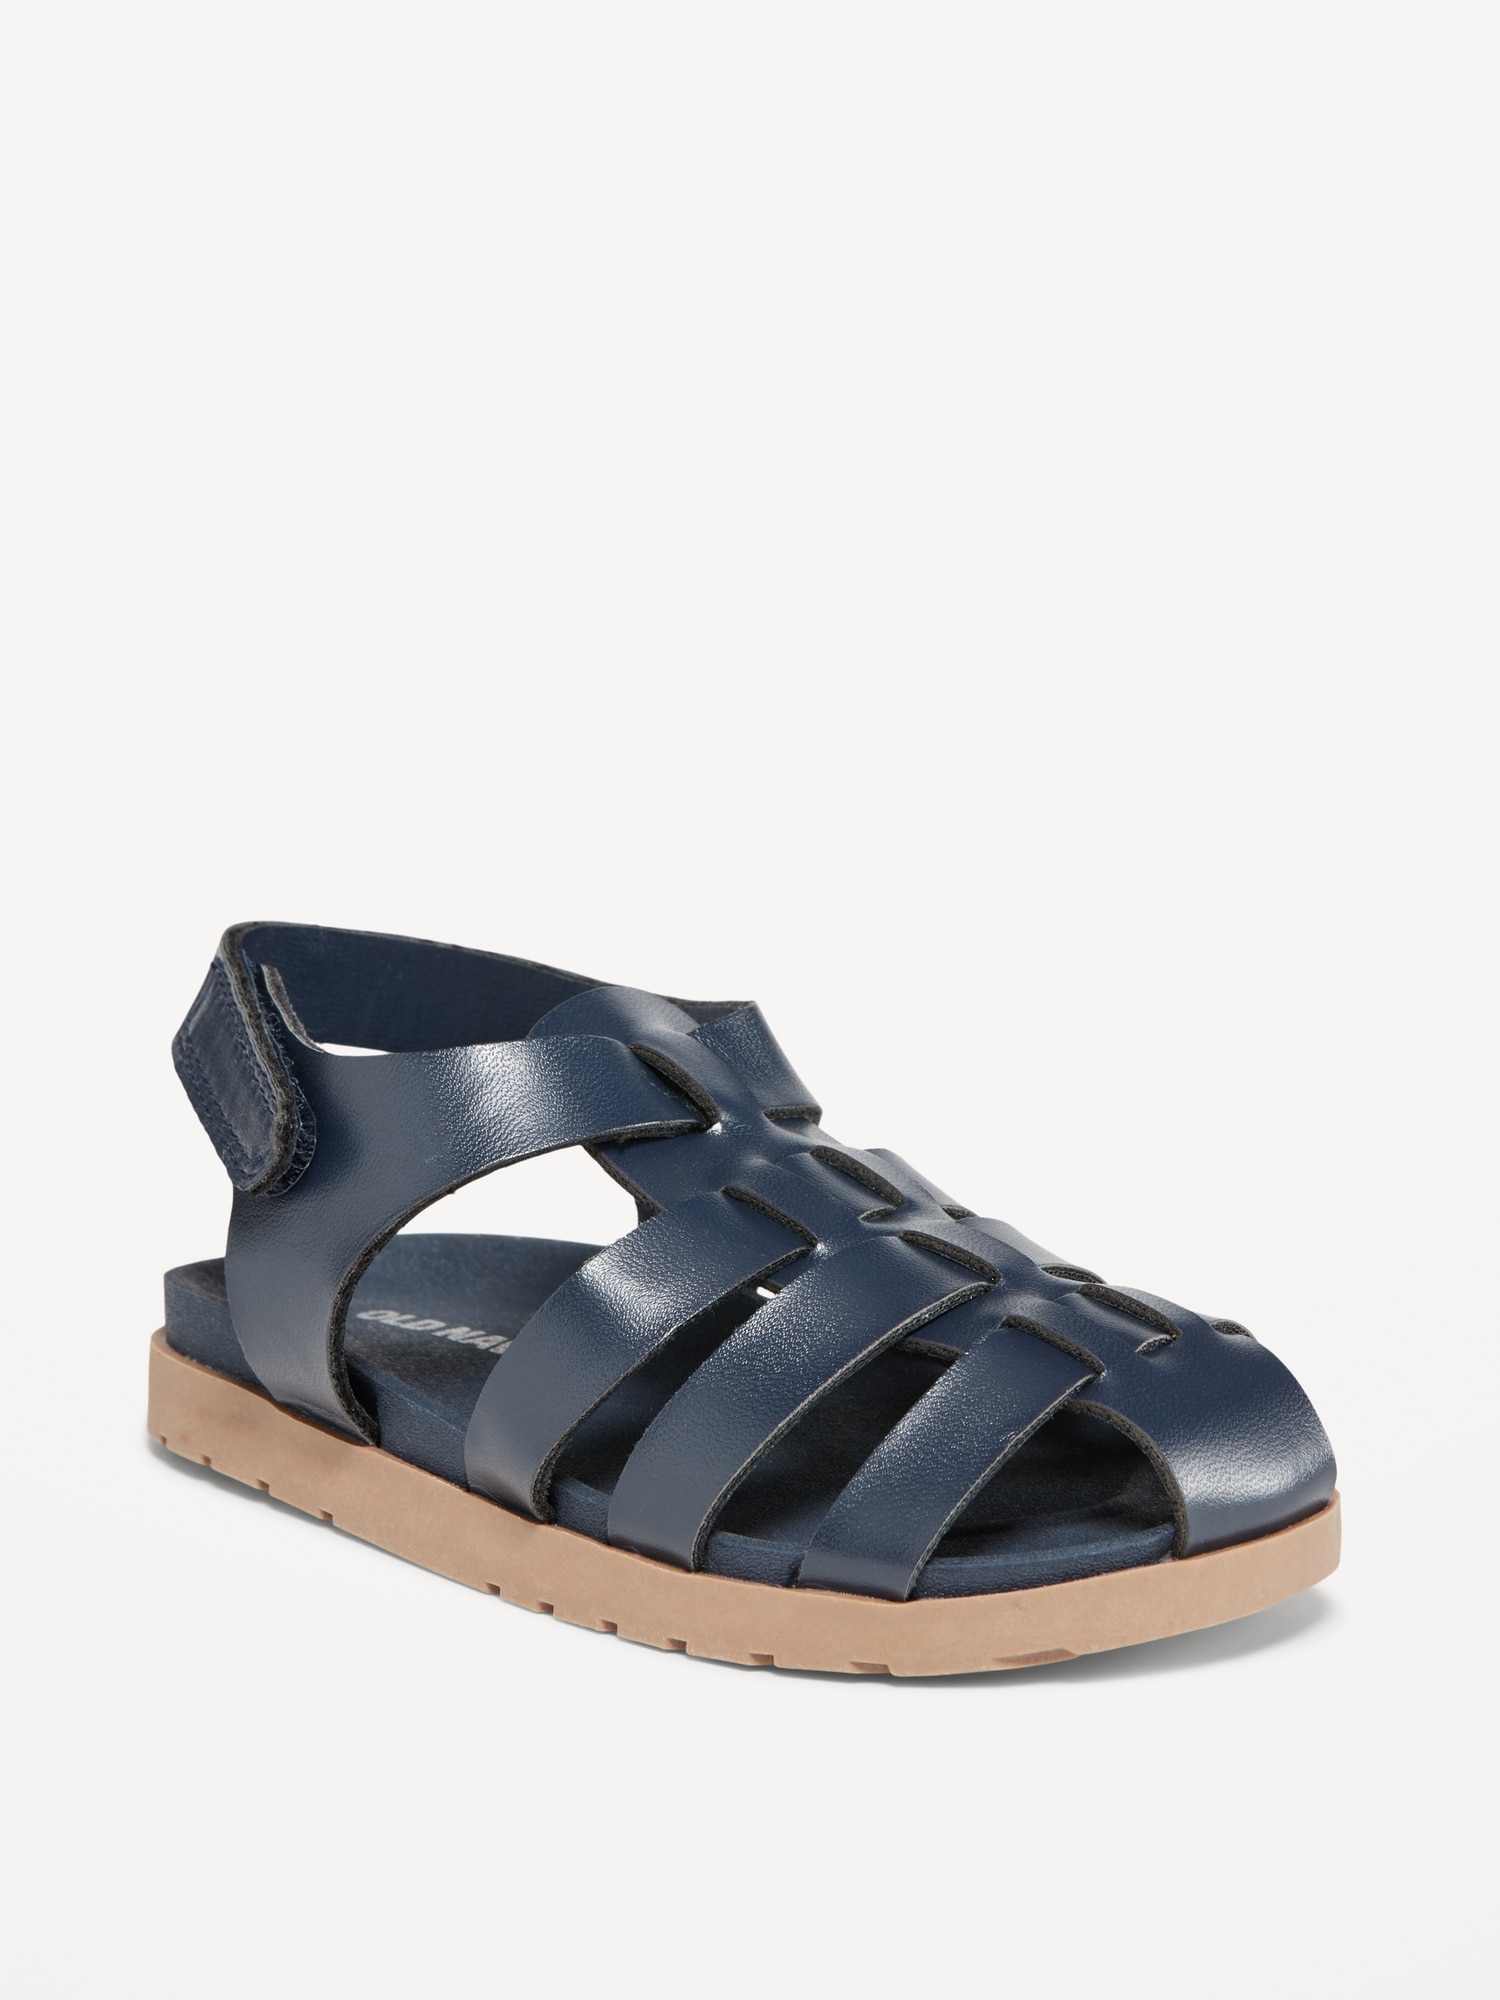 Unisex Faux-Leather Fisherman Sandal for Toddler | Old Navy